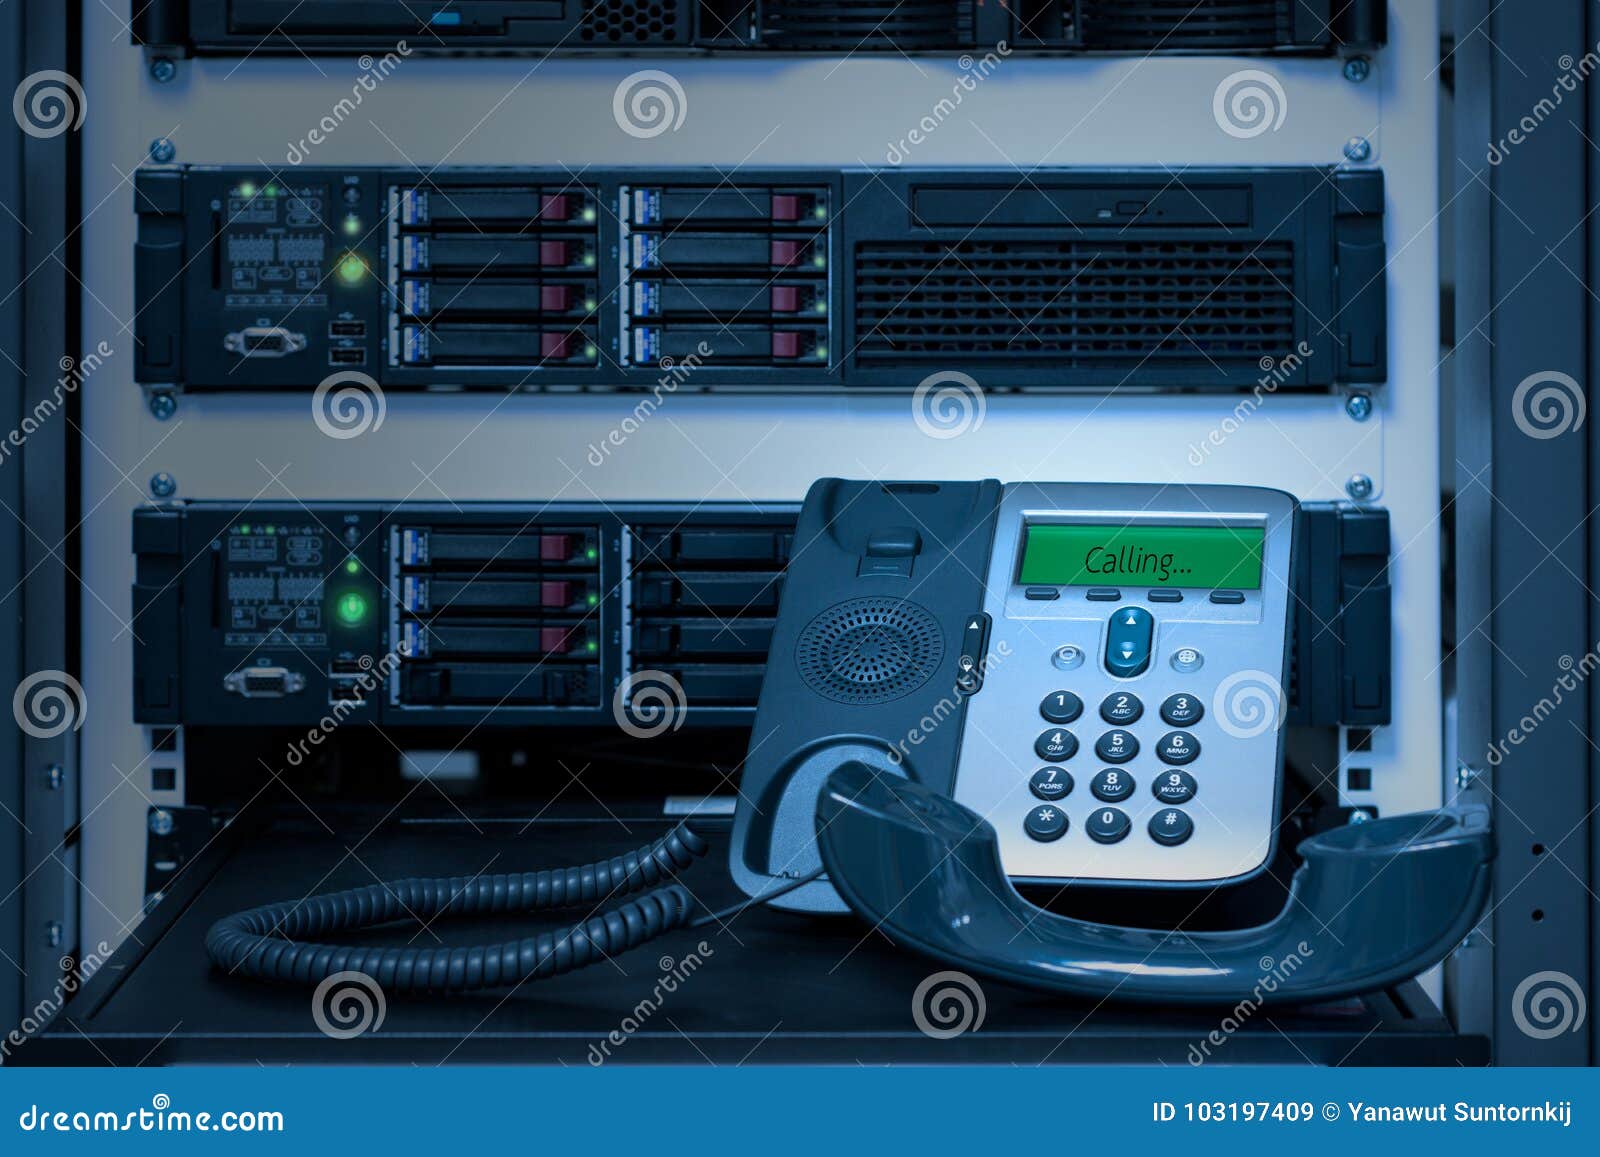 voip phone ip phone in data center room